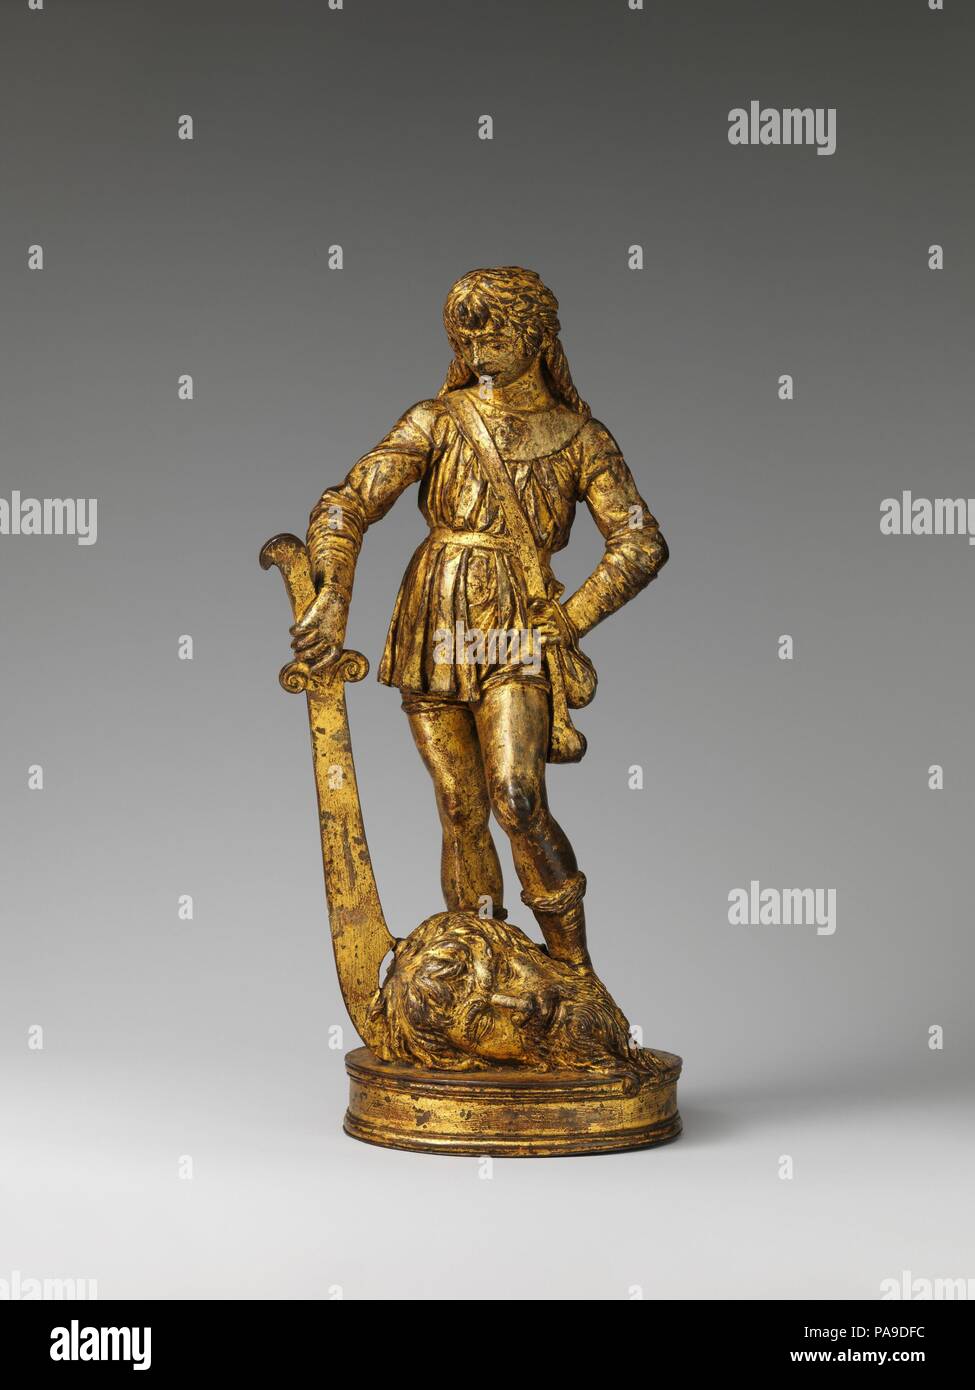 David with the Head of Goliath. Artist: Bartolomeo Bellano (Italian, Padua 1437/38-1496/97 Padua). Culture: Italian, Padua. Dimensions: Overall (confirmed): 11 1/4 × 5 1/4 × 4 7/8 in., 9.7 lb. (28.6 × 13.3 × 12.4 cm, 4.4 kg). Date: 1470-80.  This is a key work in the early Renaissance development of bronze statuettes in northern Italy. Its creator, Bartolomeo Bellano, was a disciple of Donatello's, as is documented by a payment in connection with that master's Judith Slaying Holofernes (ca. 1459, Palazzo Vecchio, Florence).[1] His independent work began with a bronze statue of Pope Paul II in  Stock Photo